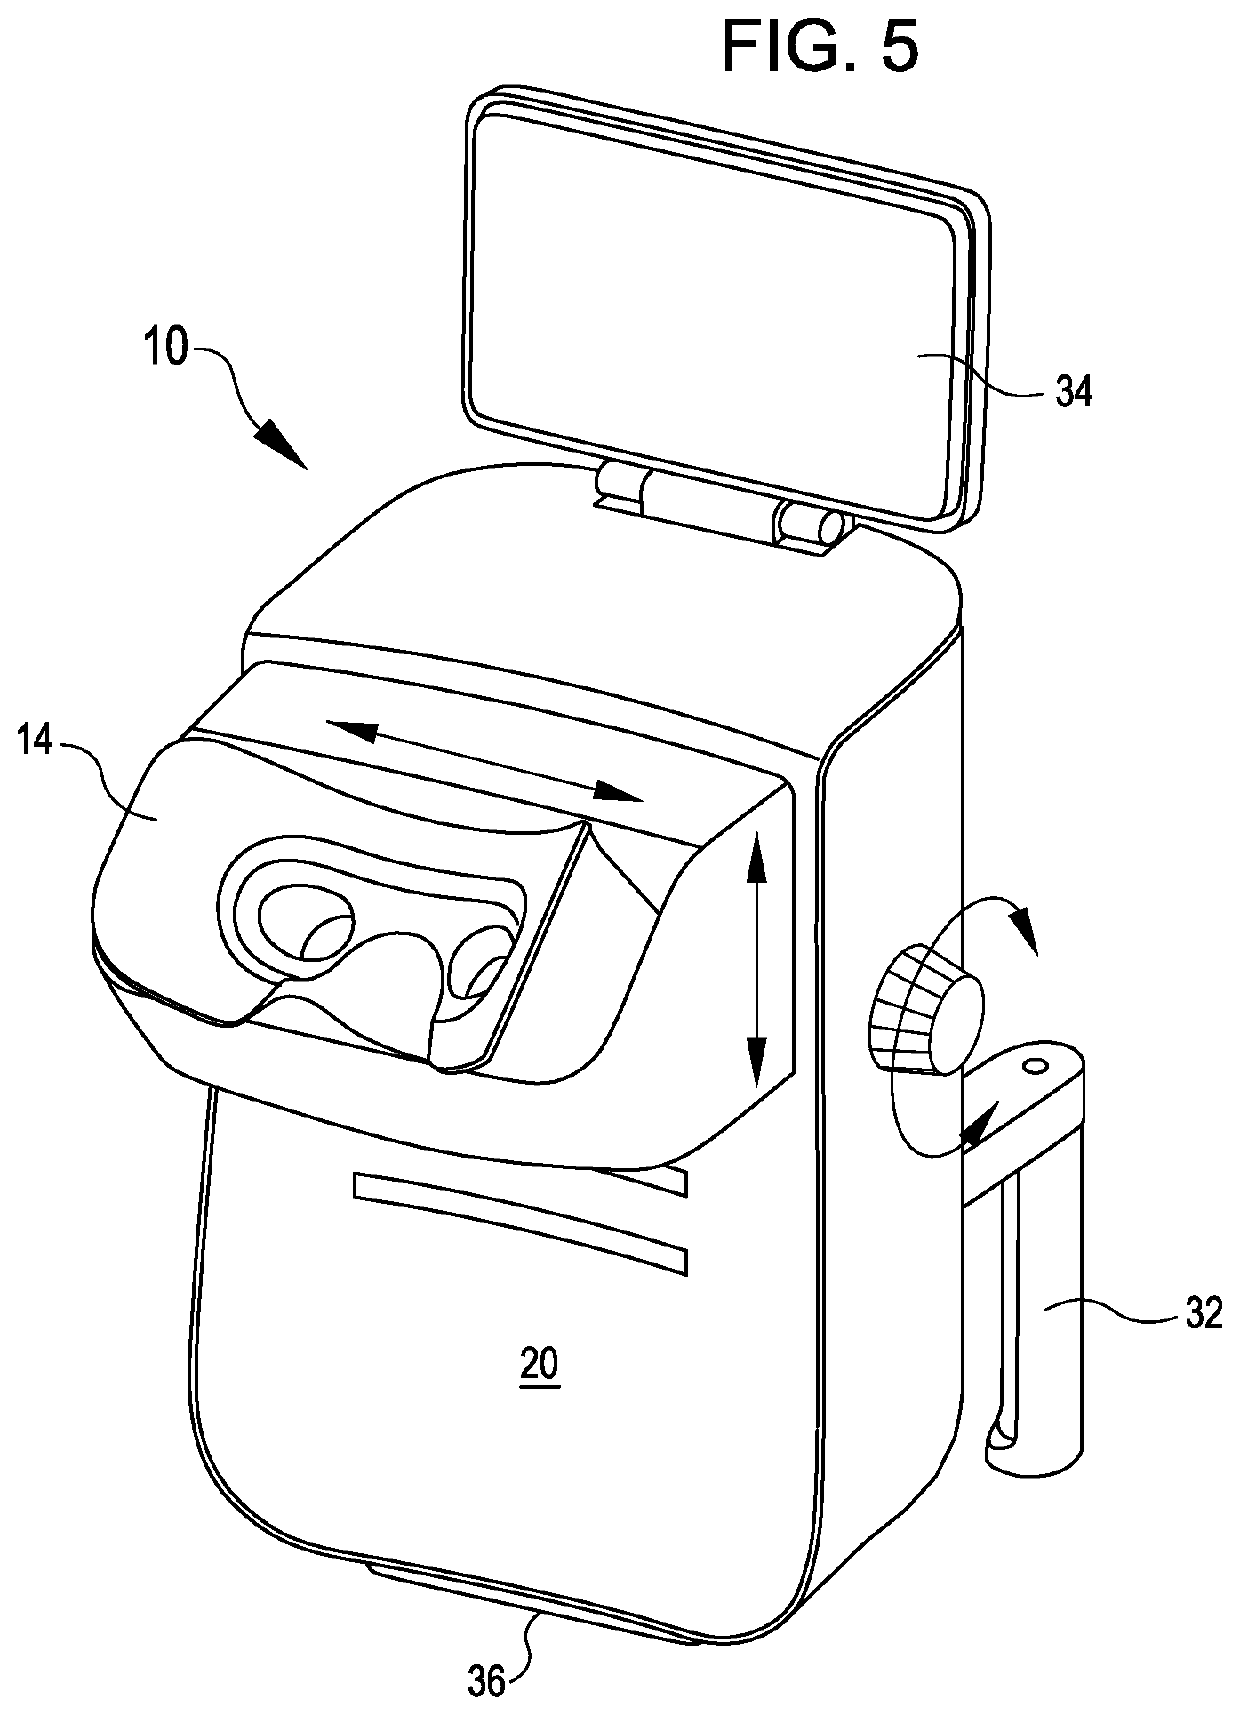 Retinal imaging device and related methods